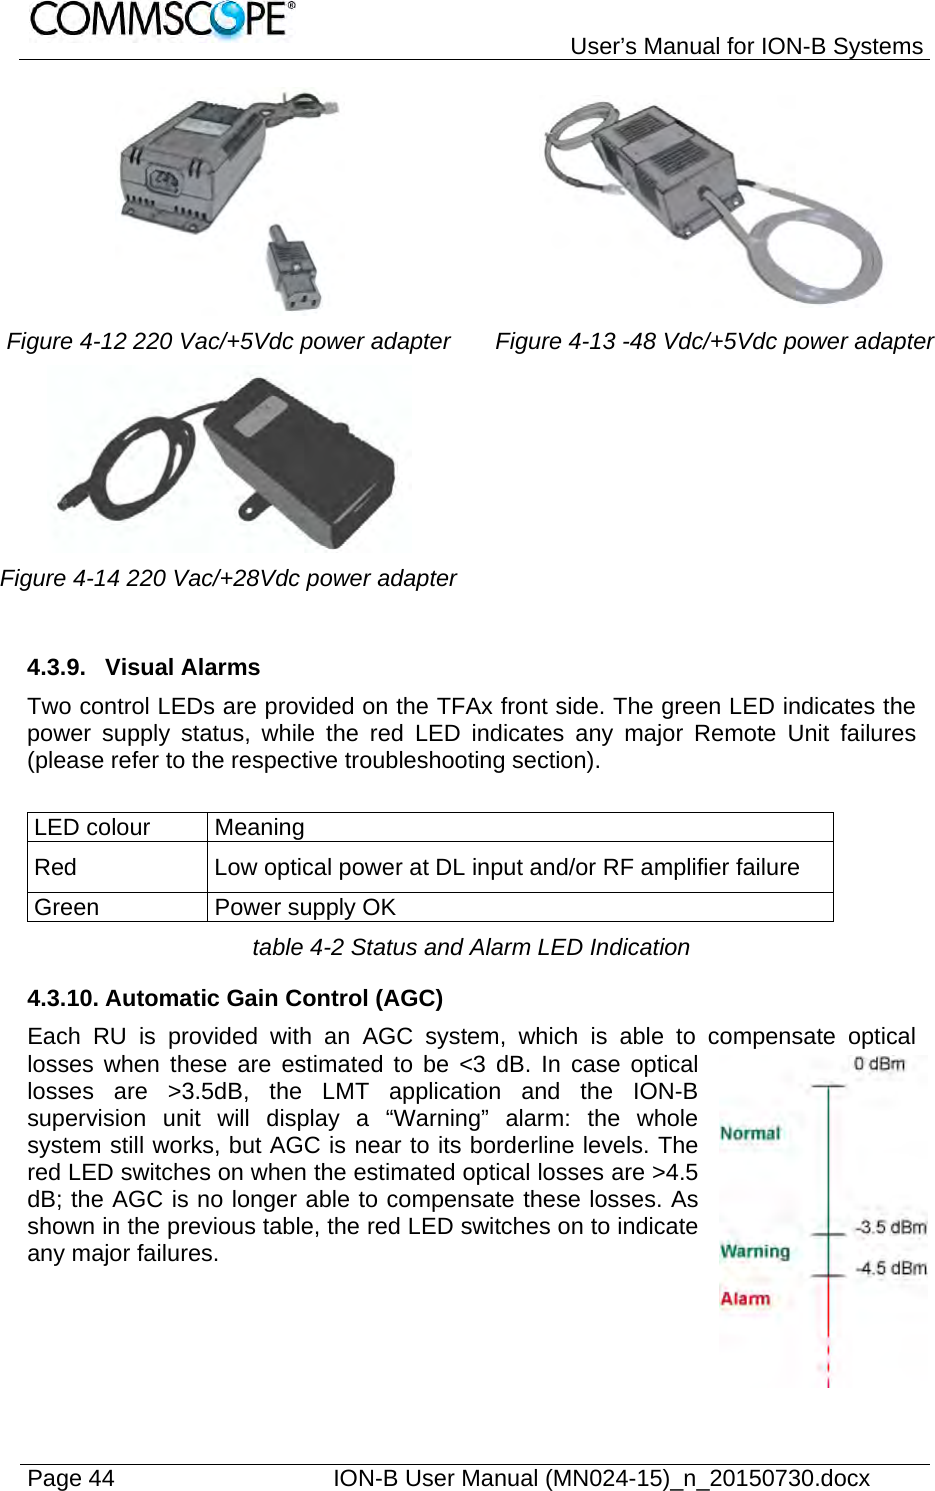   User’s Manual for ION-B Systems Page 44    ION-B User Manual (MN024-15)_n_20150730.docx    Figure 4-12 220 Vac/+5Vdc power adapter  Figure 4-13 -48 Vdc/+5Vdc power adapter  Figure 4-14 220 Vac/+28Vdc power adapter    4.3.9. Visual Alarms Two control LEDs are provided on the TFAx front side. The green LED indicates the power supply status, while the red LED indicates any major Remote Unit failures (please refer to the respective troubleshooting section).  LED colour  Meaning Red  Low optical power at DL input and/or RF amplifier failure Green  Power supply OK table 4-2 Status and Alarm LED Indication 4.3.10. Automatic Gain Control (AGC) Each RU is provided with an AGC system, which is able to compensate optical losses when these are estimated to be &lt;3 dB. In case optical losses are &gt;3.5dB, the LMT application and the ION-B supervision unit will display a “Warning” alarm: the whole system still works, but AGC is near to its borderline levels. The red LED switches on when the estimated optical losses are &gt;4.5 dB; the AGC is no longer able to compensate these losses. As shown in the previous table, the red LED switches on to indicate any major failures.  